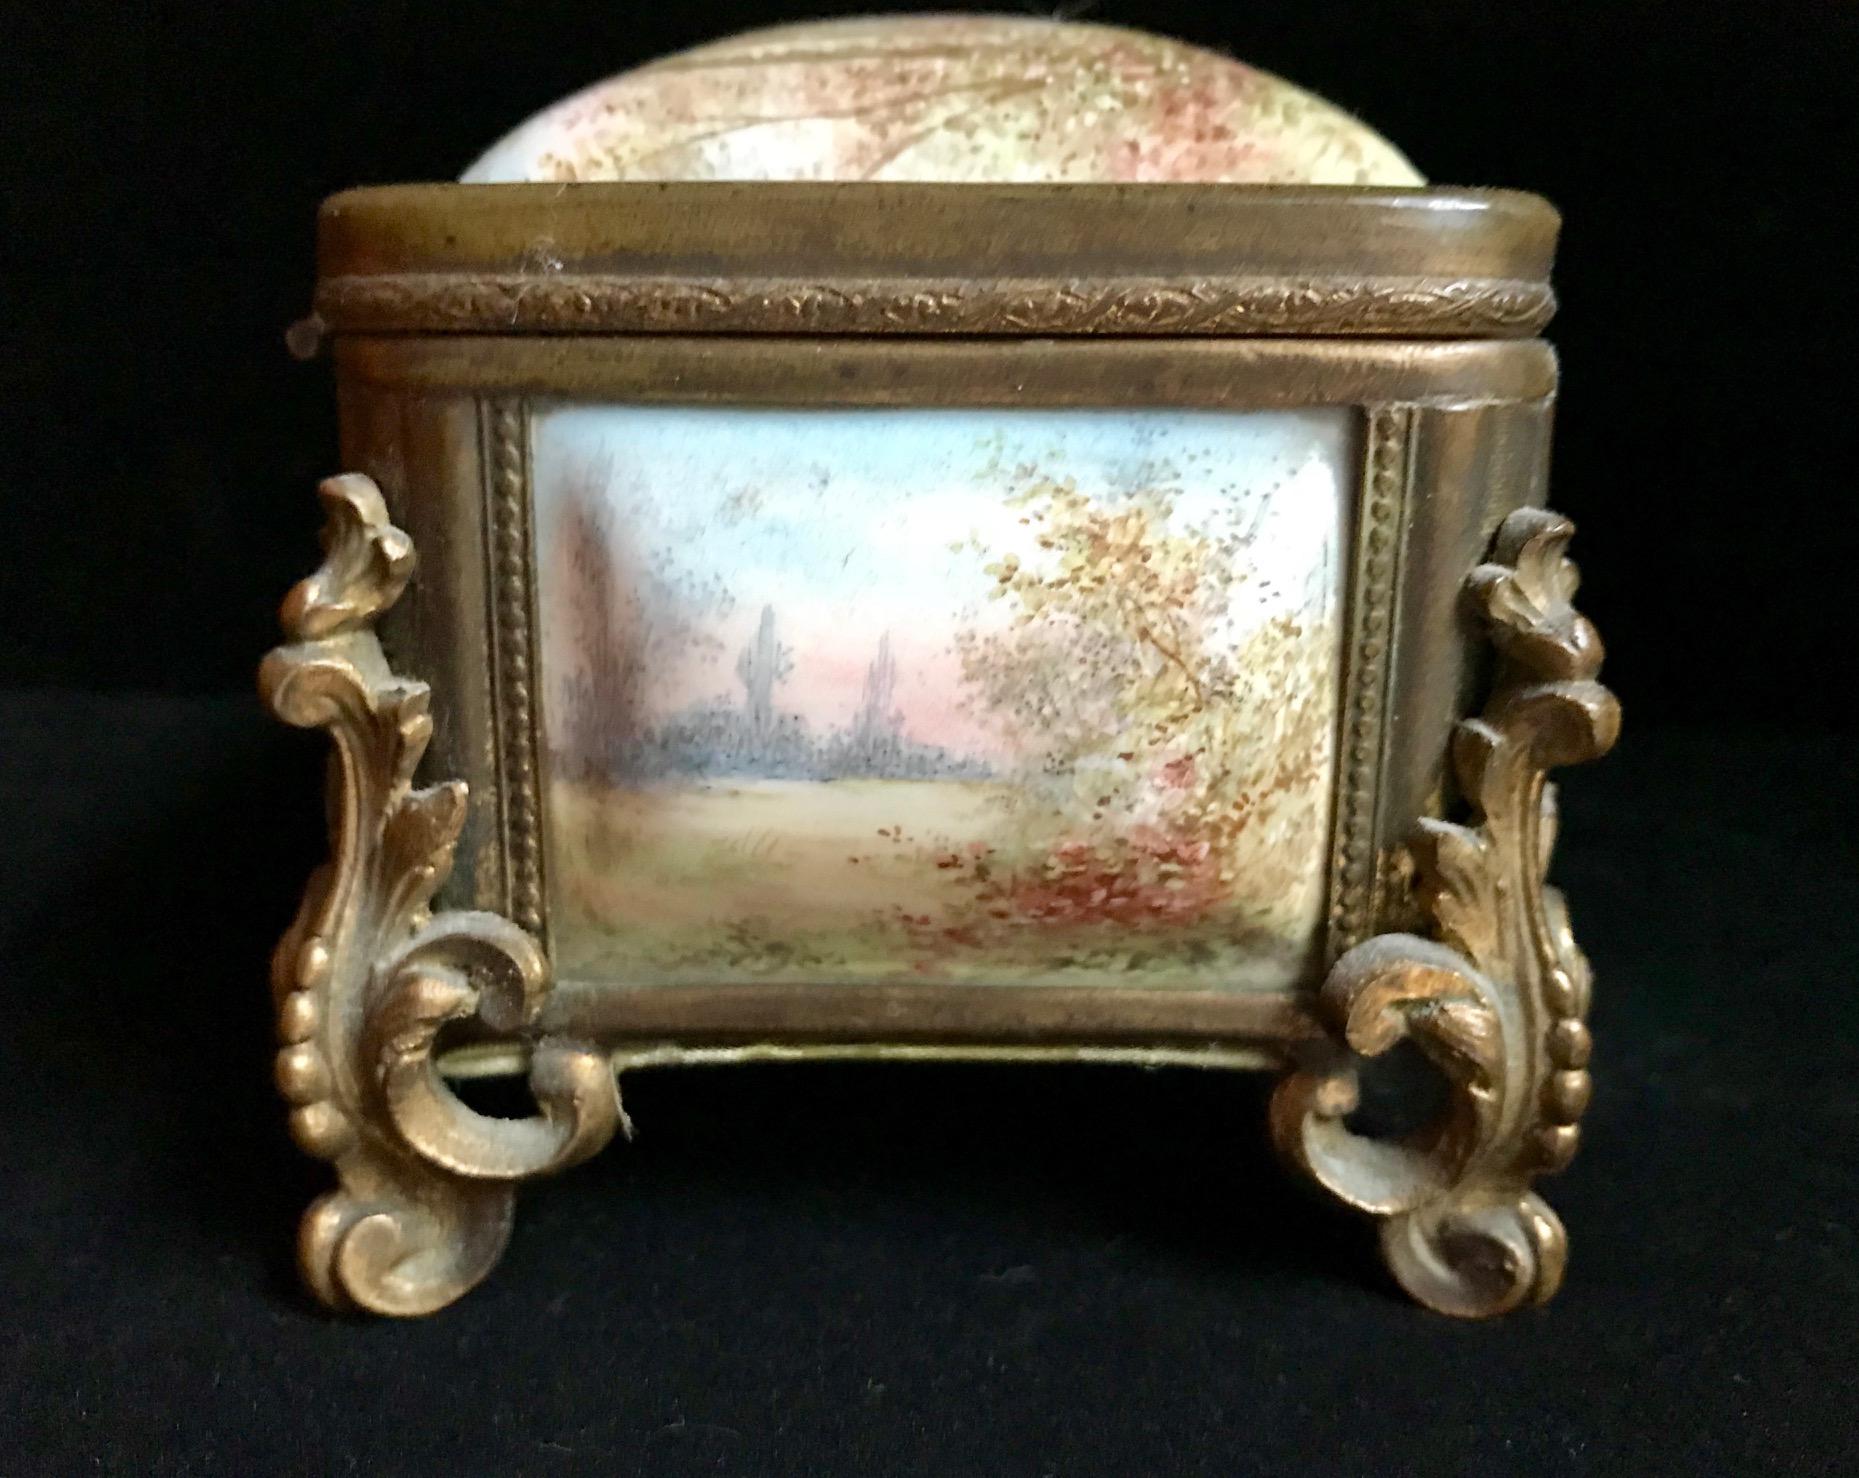 19th Century French Polychrome Enamel and Bronze Jewelry Box Casket In Good Condition For Sale In Vero Beach, FL